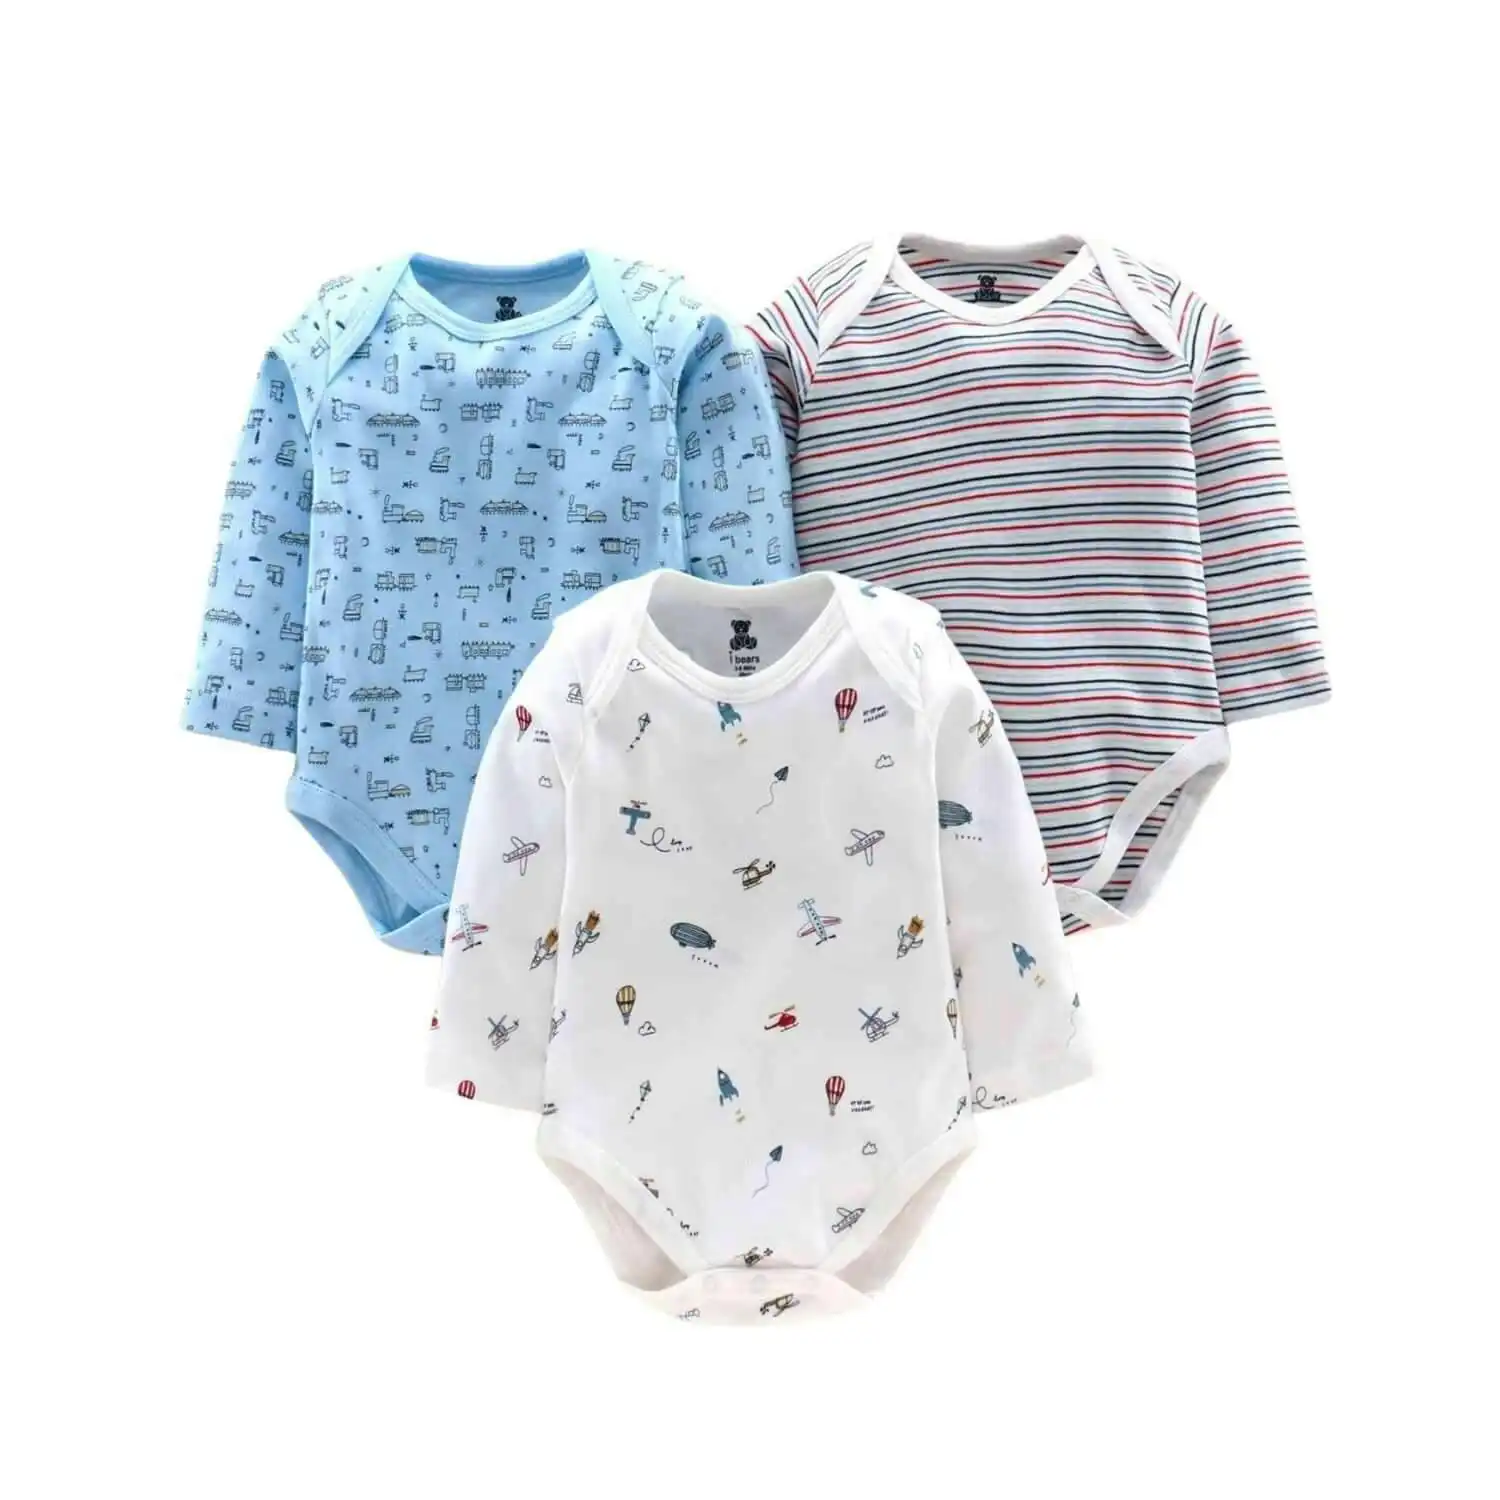 BabiesMart 3 Pack New Born Baby Clothes Unisex Full Sleeves Onesies